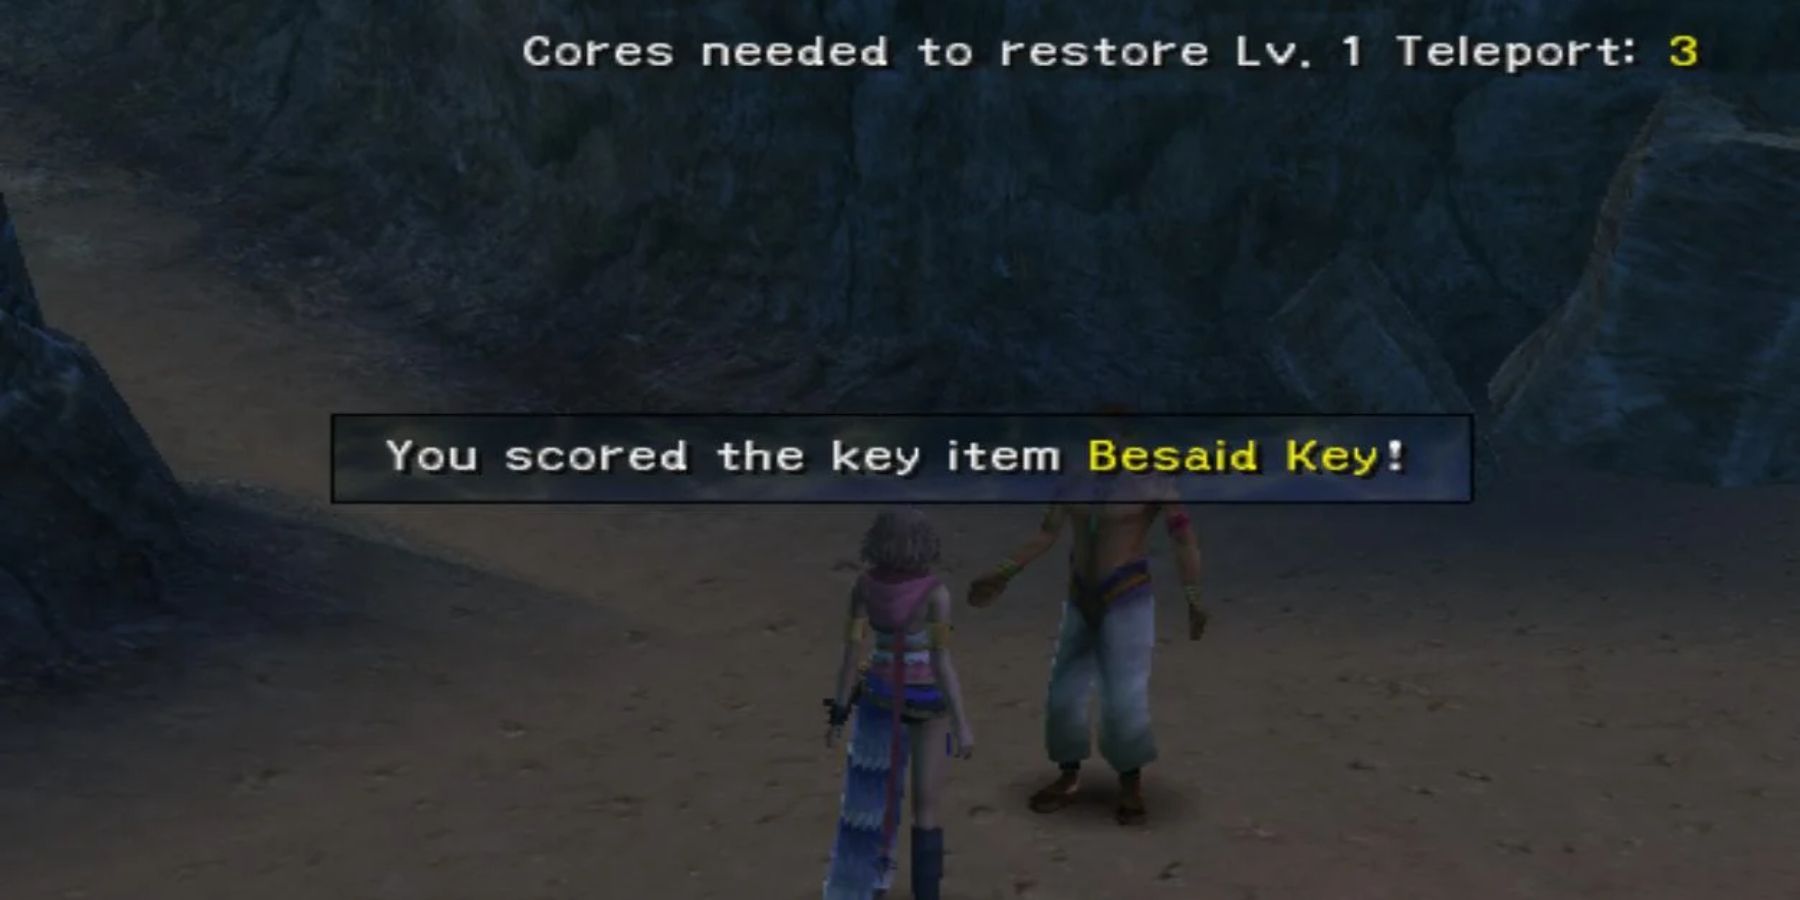 The Besaid Key in Final Fantasy 10-2